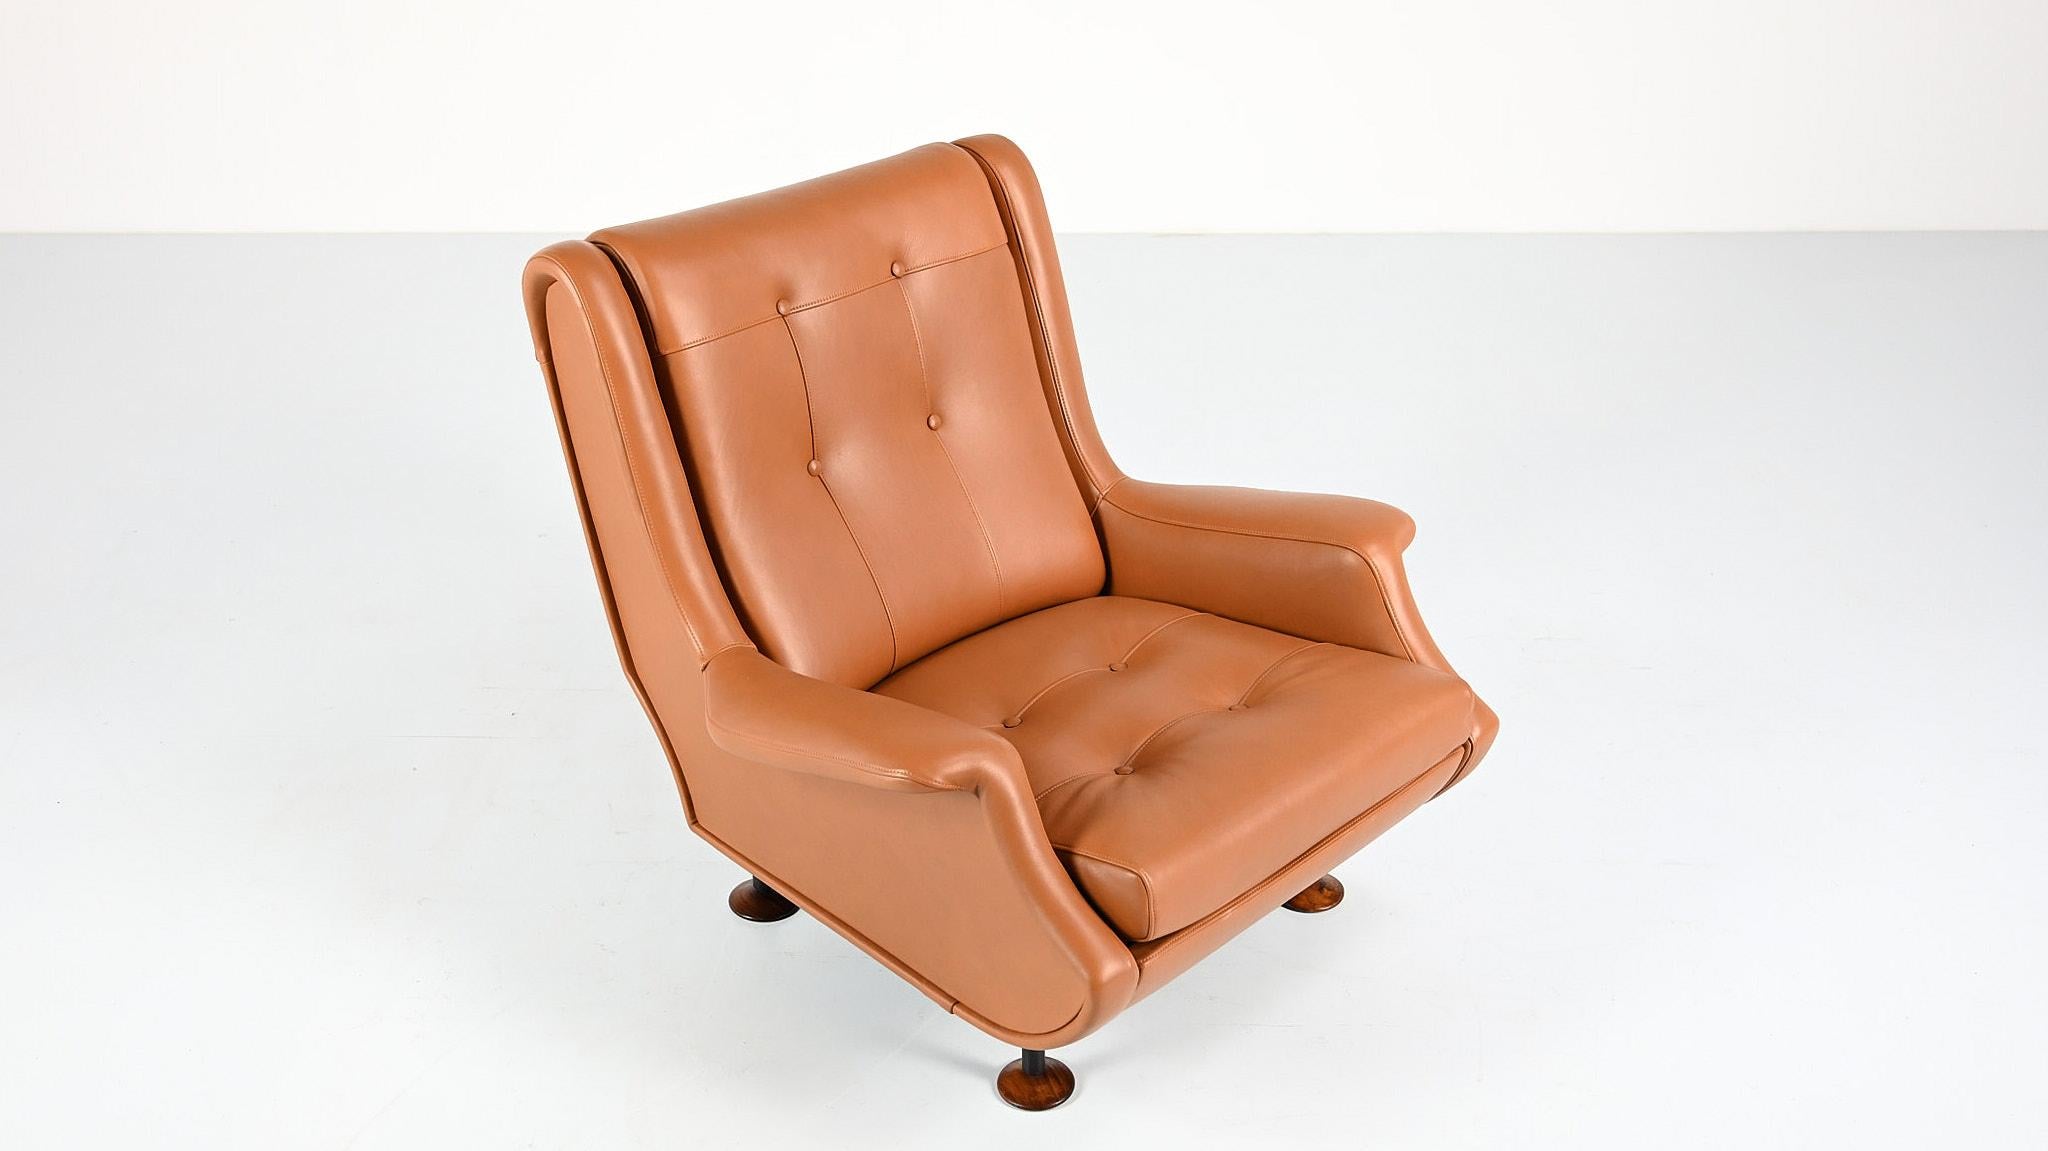 Armchair model “Regent”, designed by Marco Zanuso for Arflex in 1960. This exemple has been fully and faithfully reupholstered as original, with high-end cognac leather ans is perhaps the most comfortable Zanuso’s armchair. Italy, C.1960. Seat